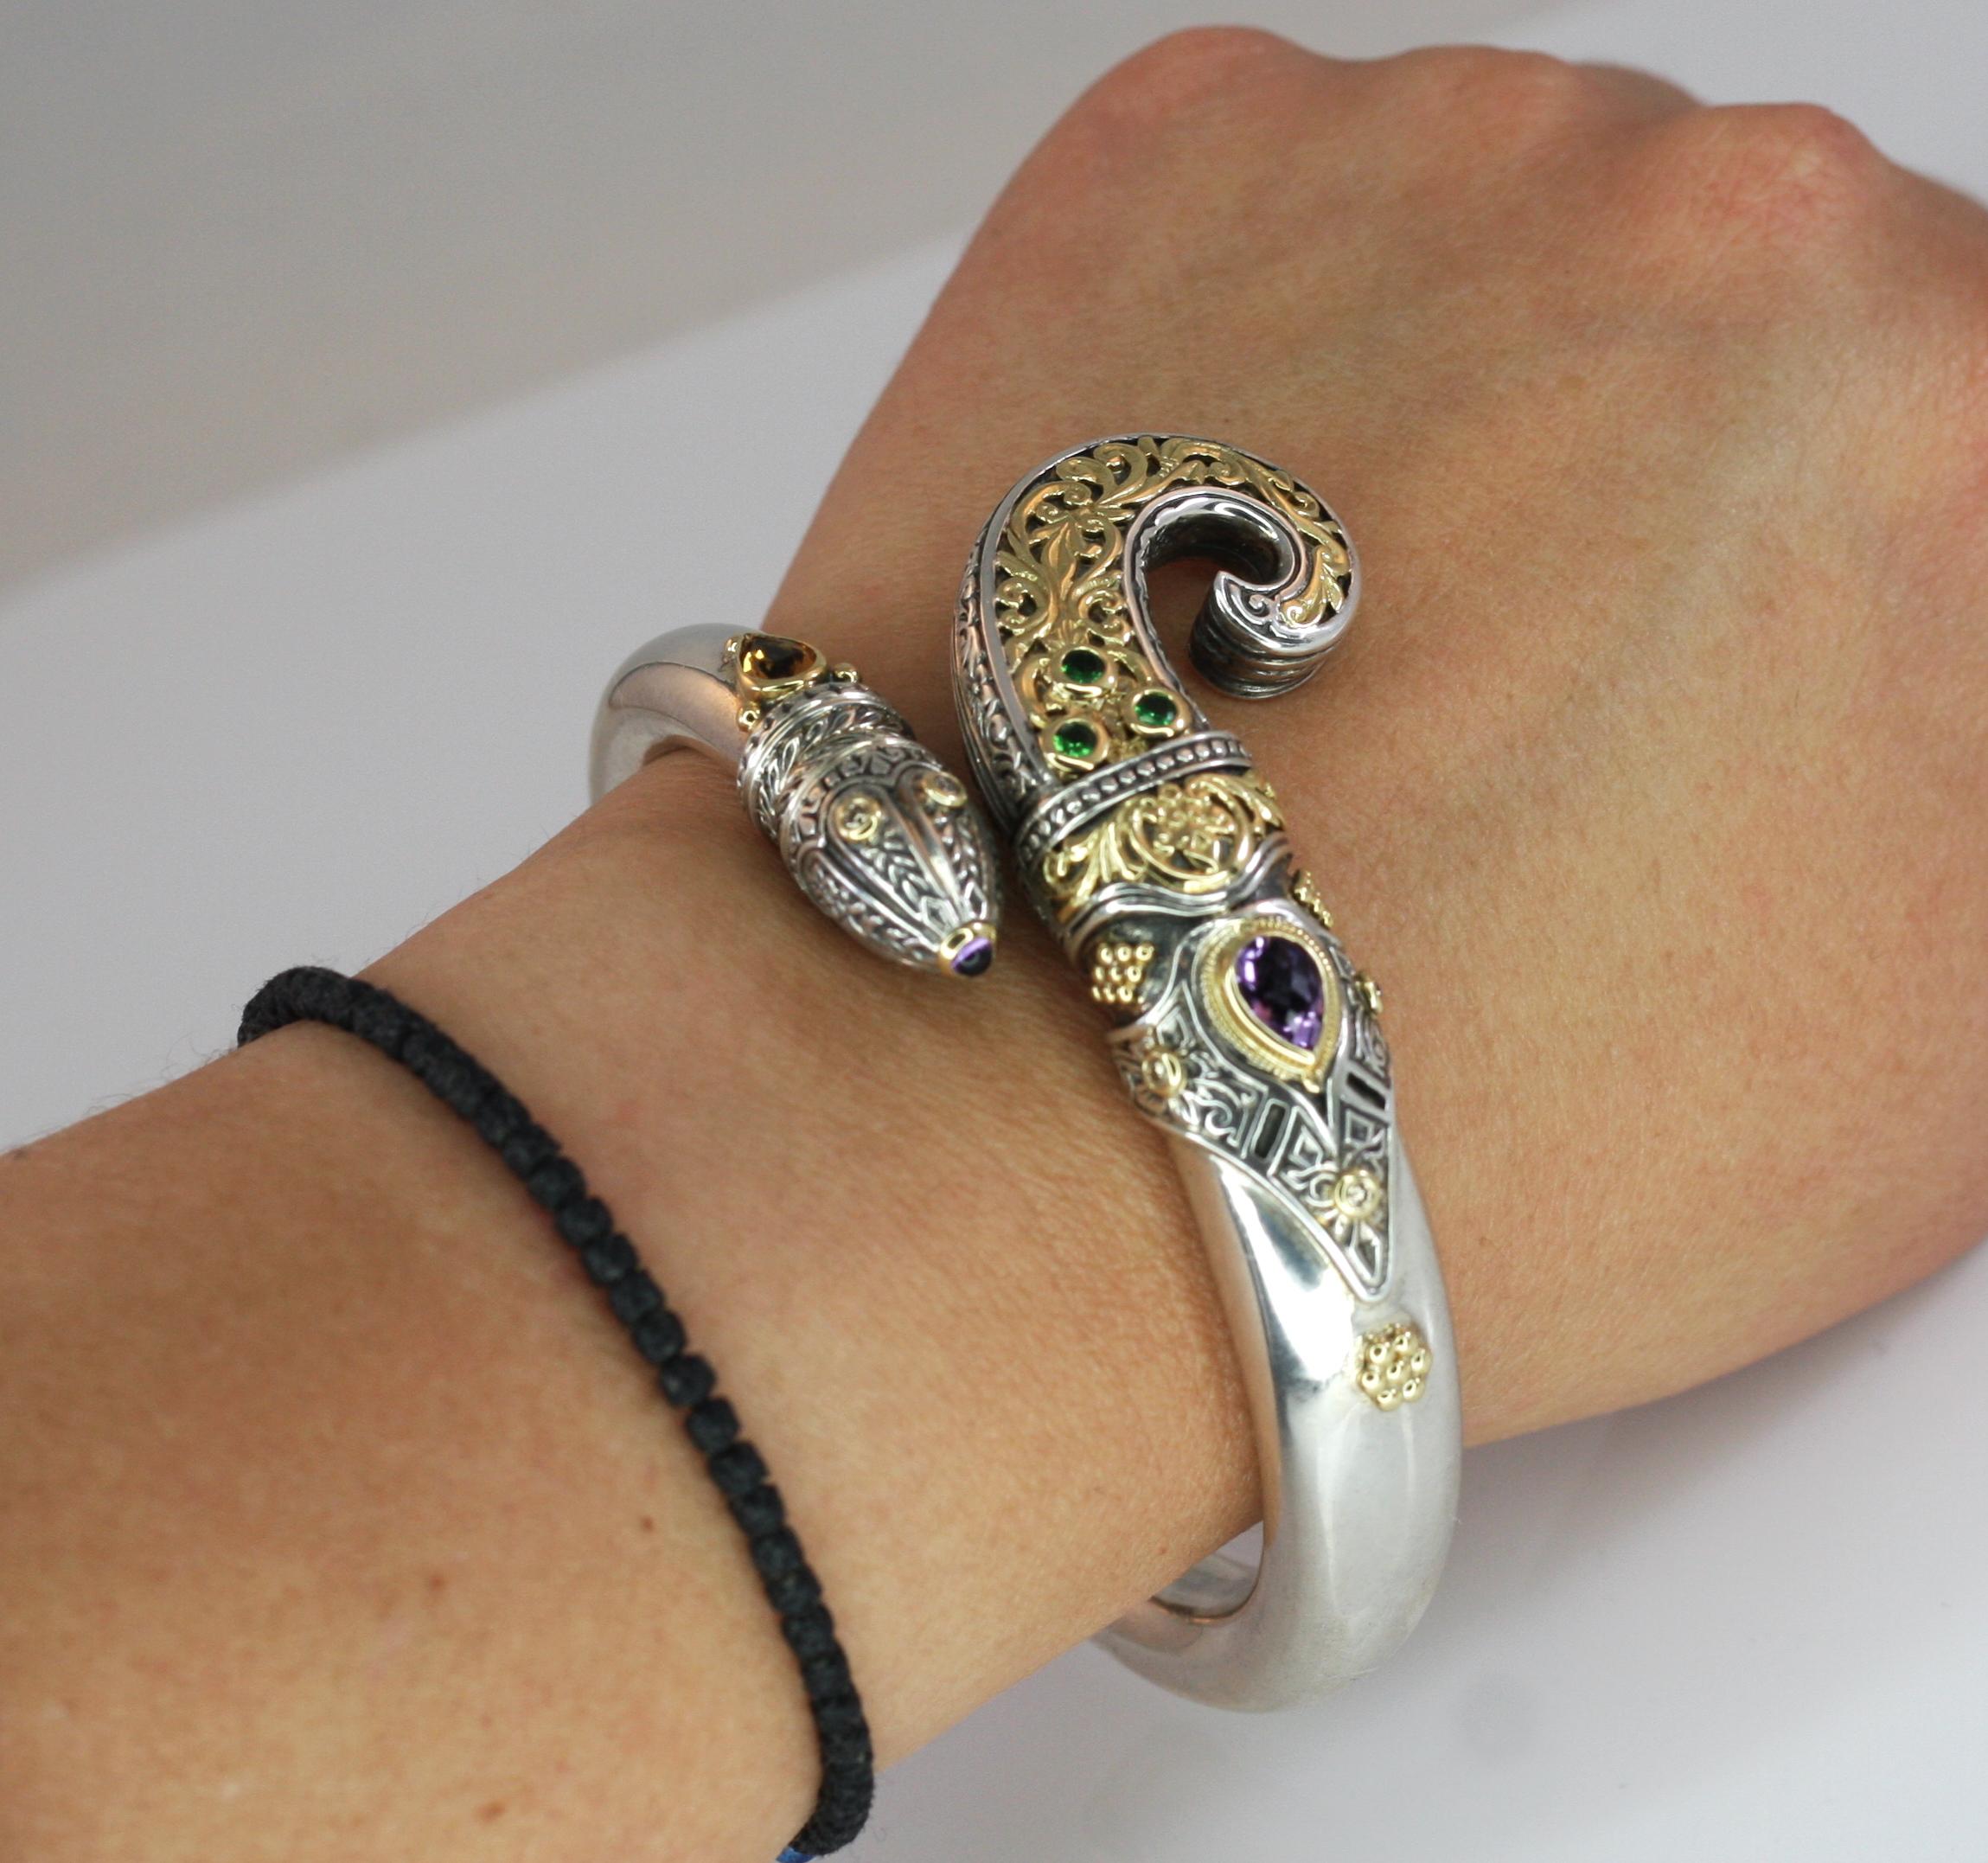 Presenting all handmade heavy decorated cuff bracelet crafted from sterling silver and solid 18 Karat yellow gold to create a unique look. This animal-shaped bracelet features 1.52 Carat pear shape Amethyst, 0.80 Carat Pear shape Citrine, 0.30 Carat